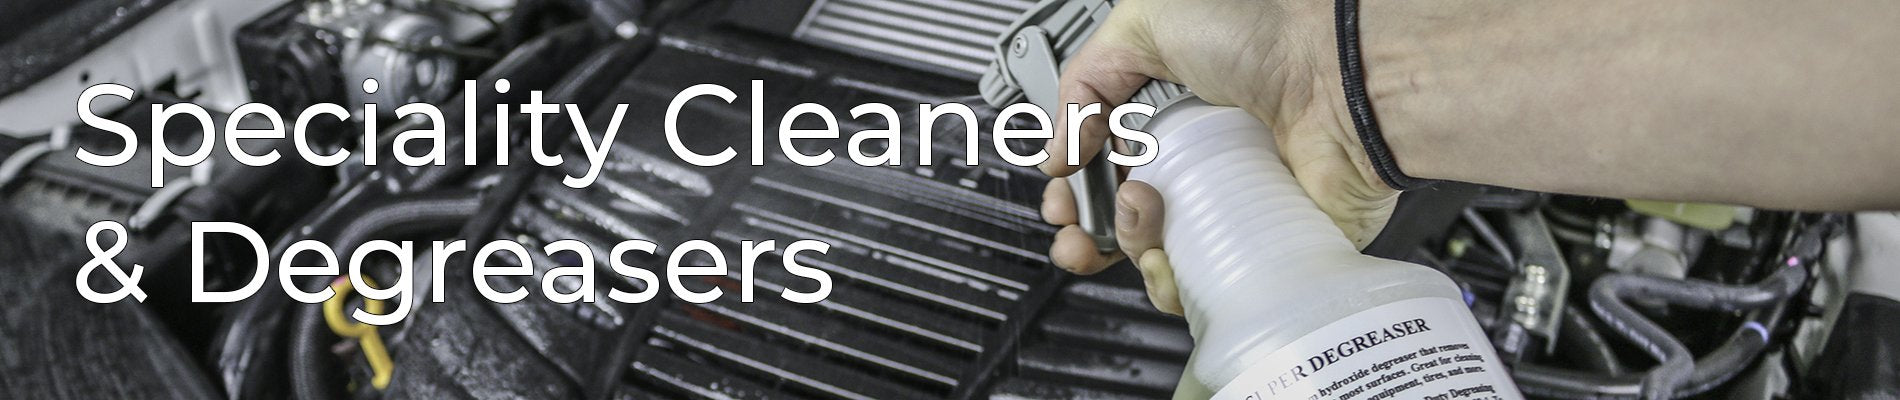 Specialty Cleaners, Degreasers & Removers